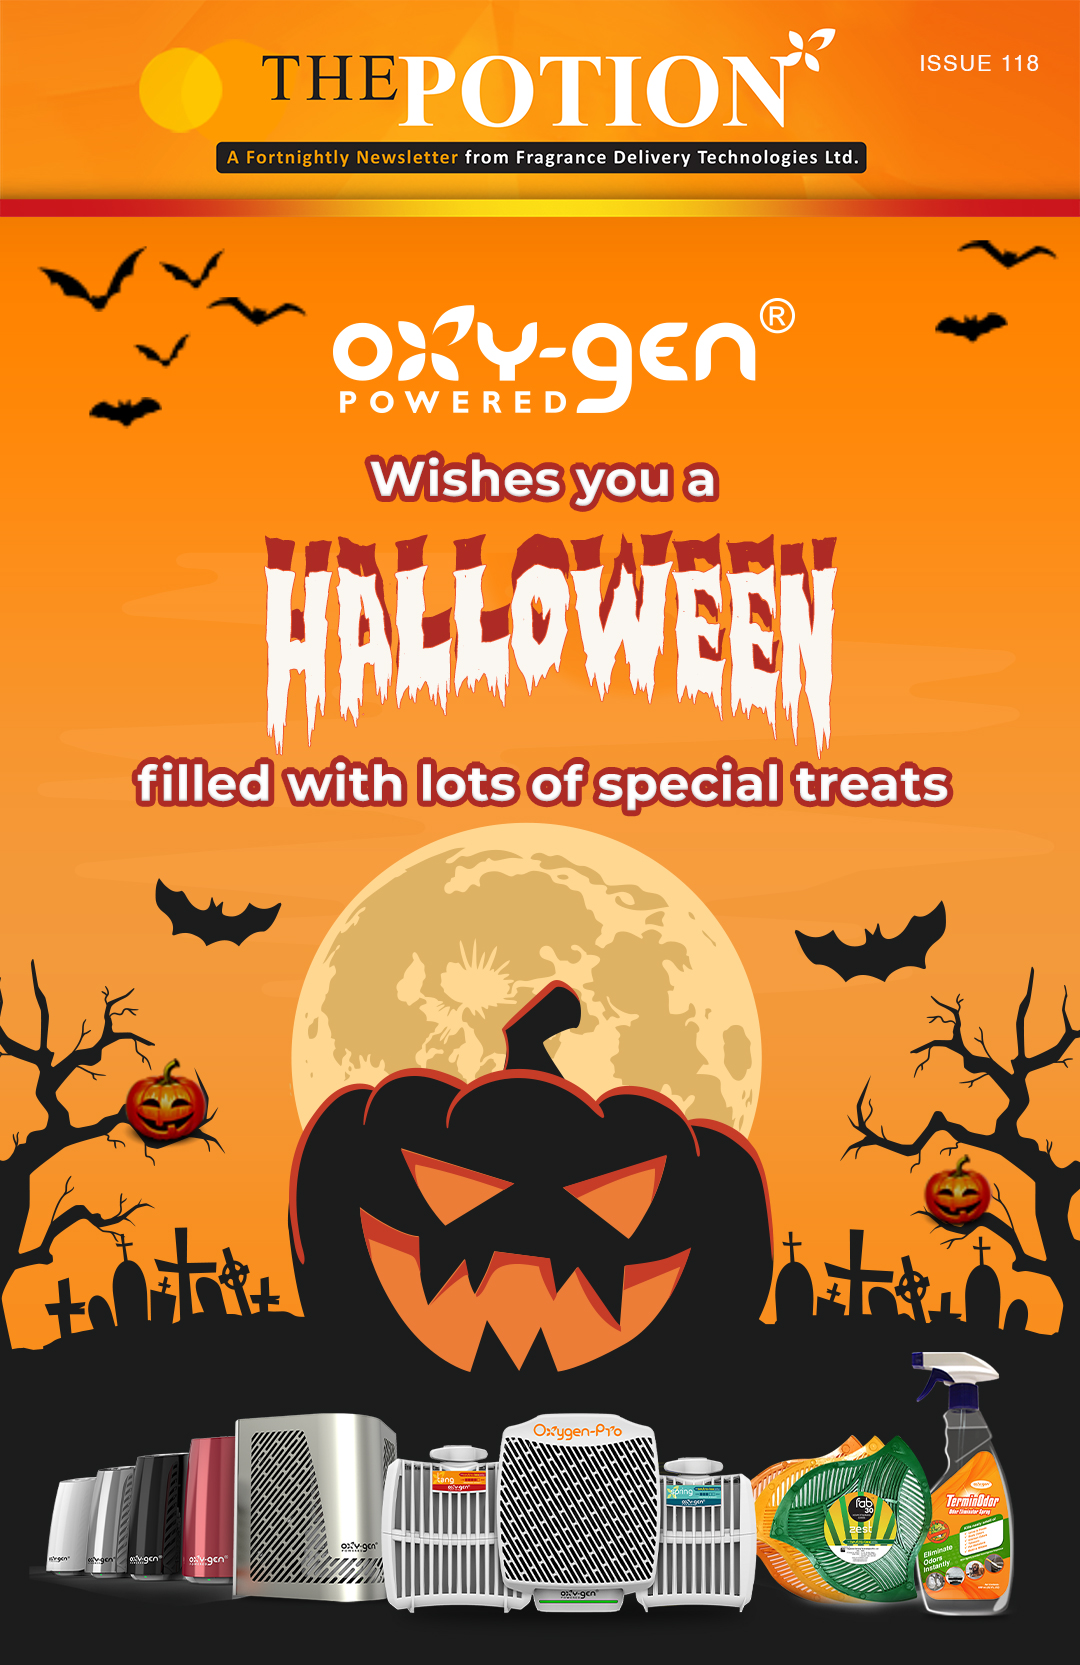 Oxy-Gen Powered wishes you a spooktacular Halloween!